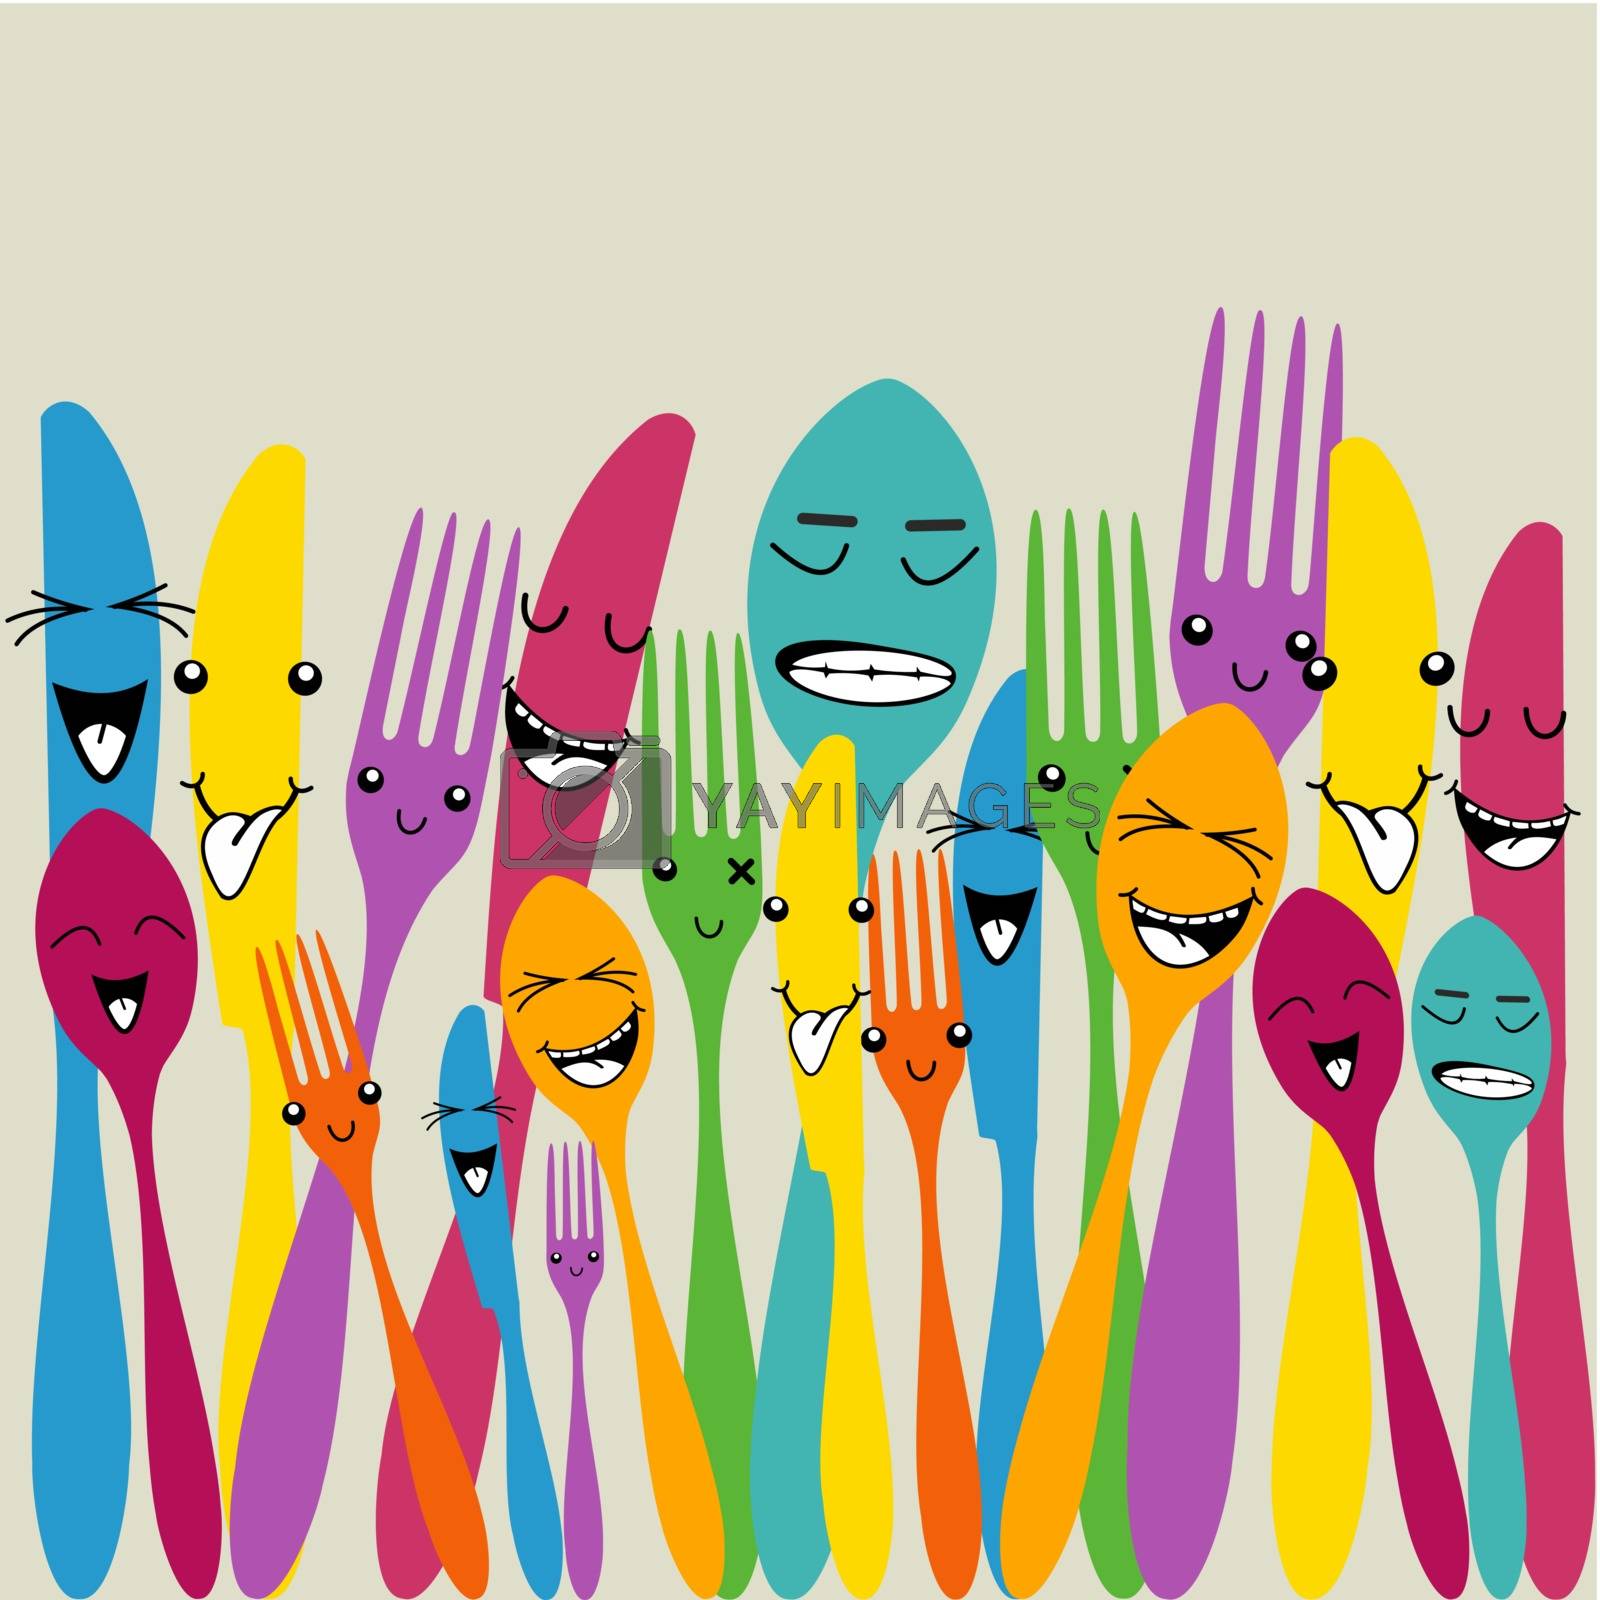 Royalty free image of Colorful silverware set by cienpies